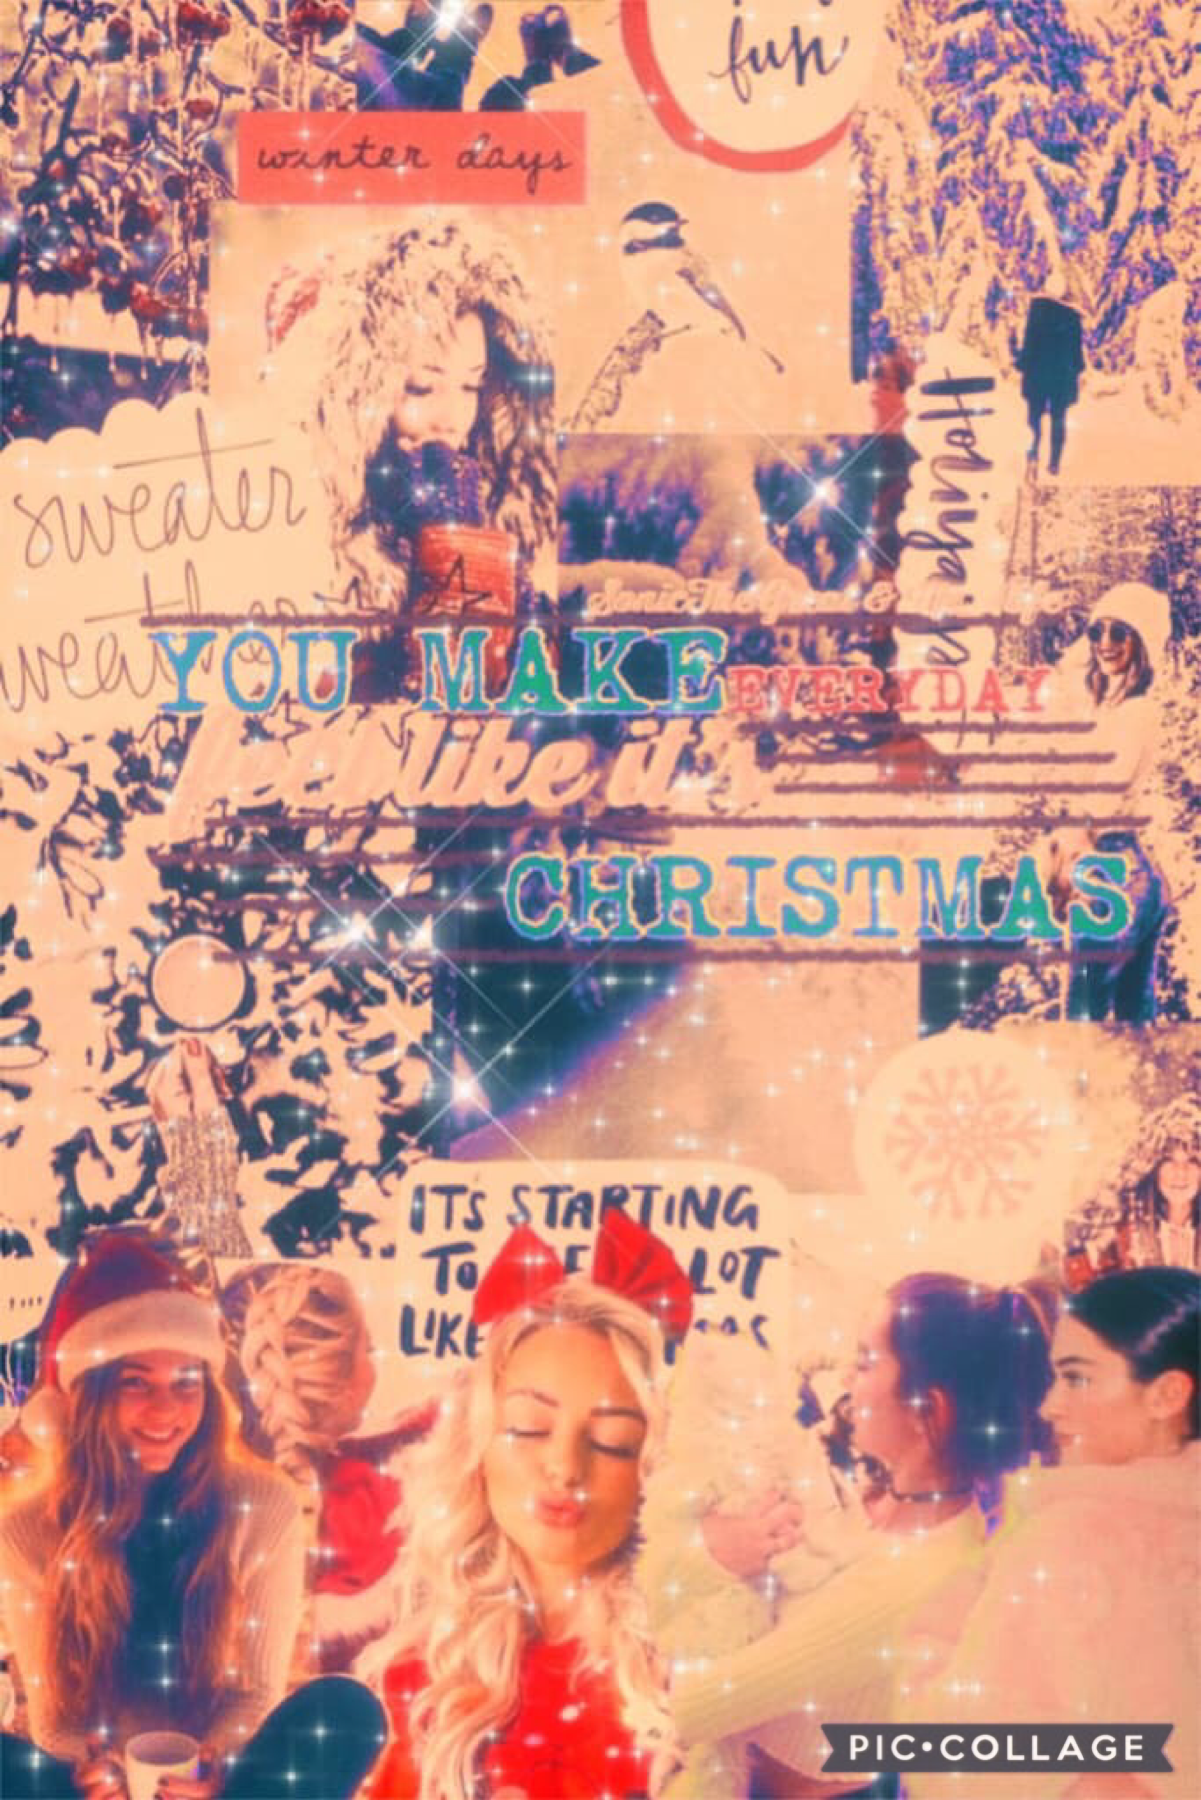 🎄💙✨tap✨💙🎄
Christmas collab with my amazing friend @Me_4life! She made the bootiful bg, effects and overlays and I made the text! It says “You make everyday feel like it’s Christmas”, inspired by Jonas Brothers!